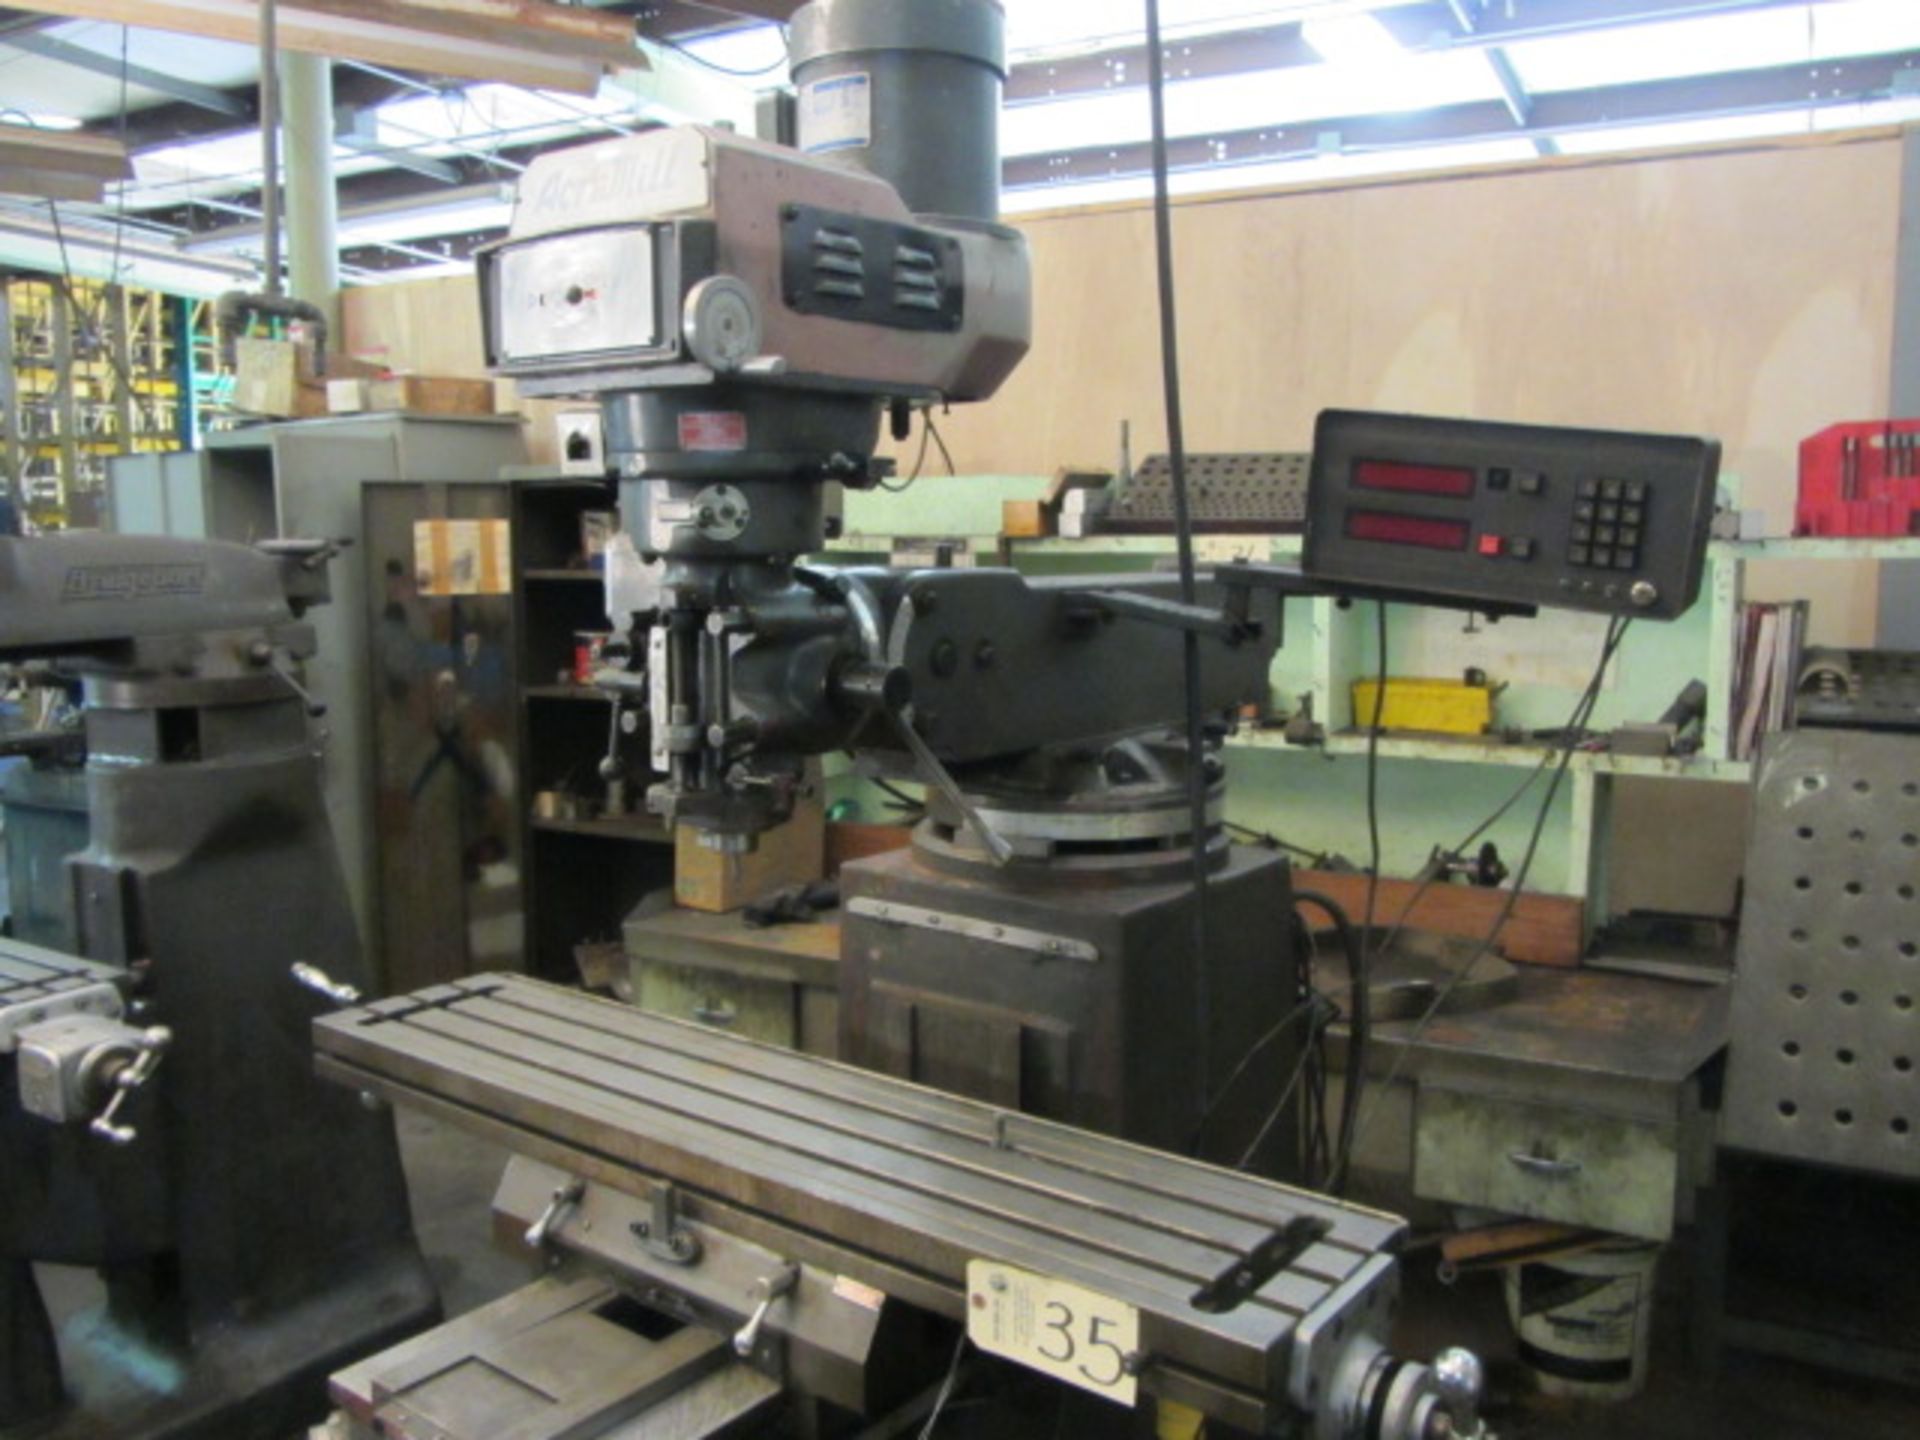 Acra Variable Speed Vertical Milling Machine with 10'' x 50'' Table, R-8 Variable Spindle Speeds - Image 5 of 6